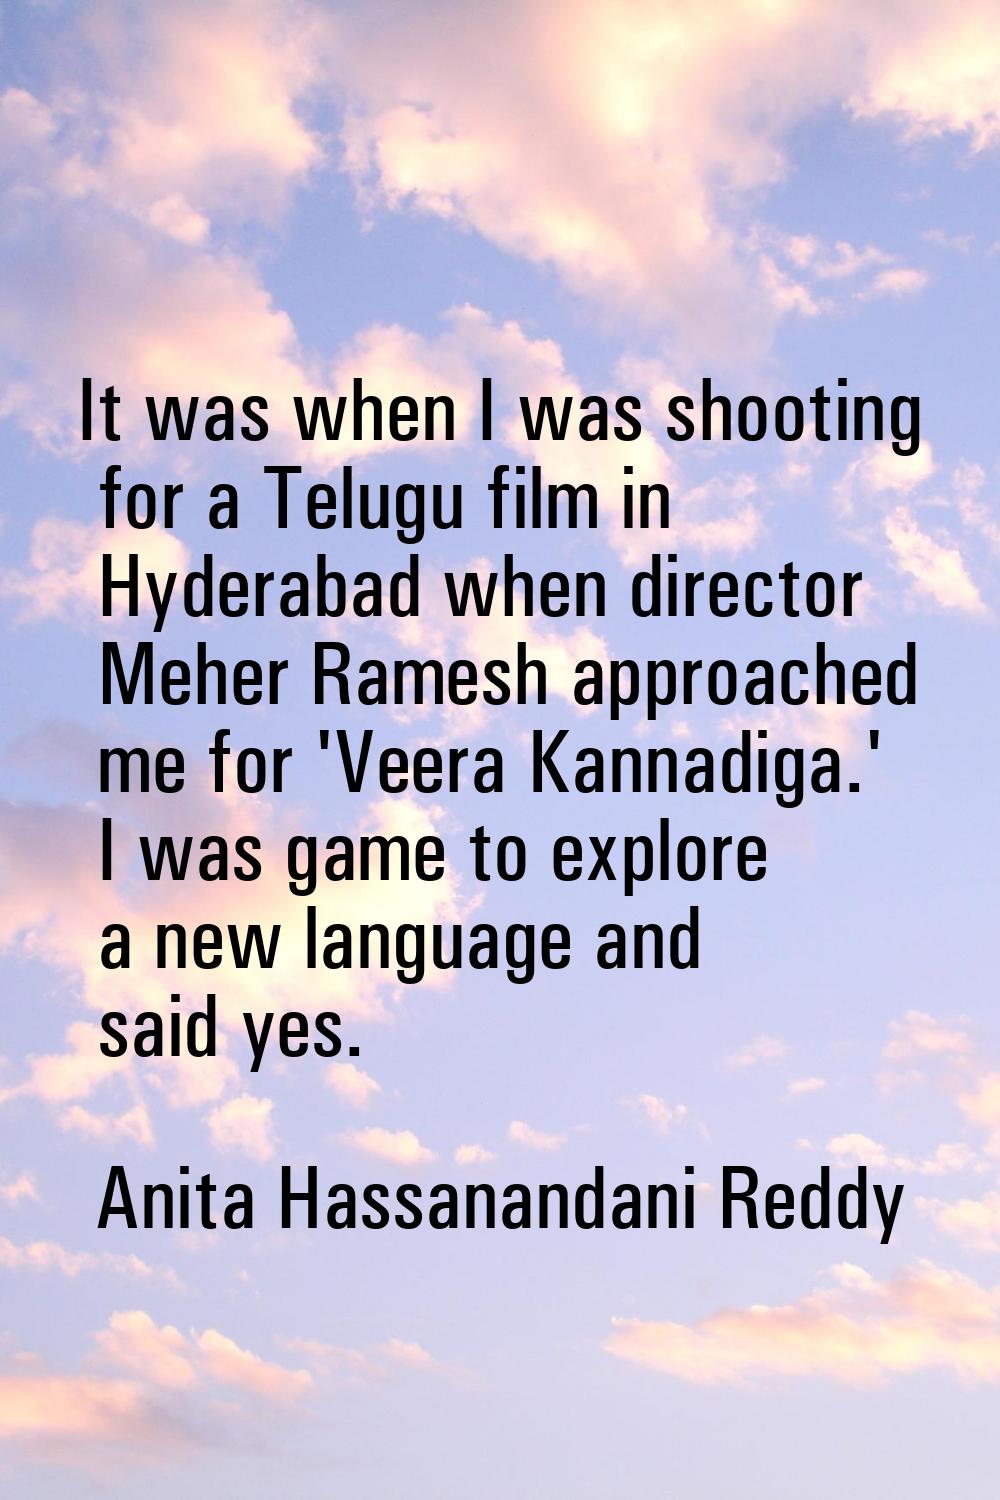 It was when I was shooting for a Telugu film in Hyderabad when director Meher Ramesh approached me 